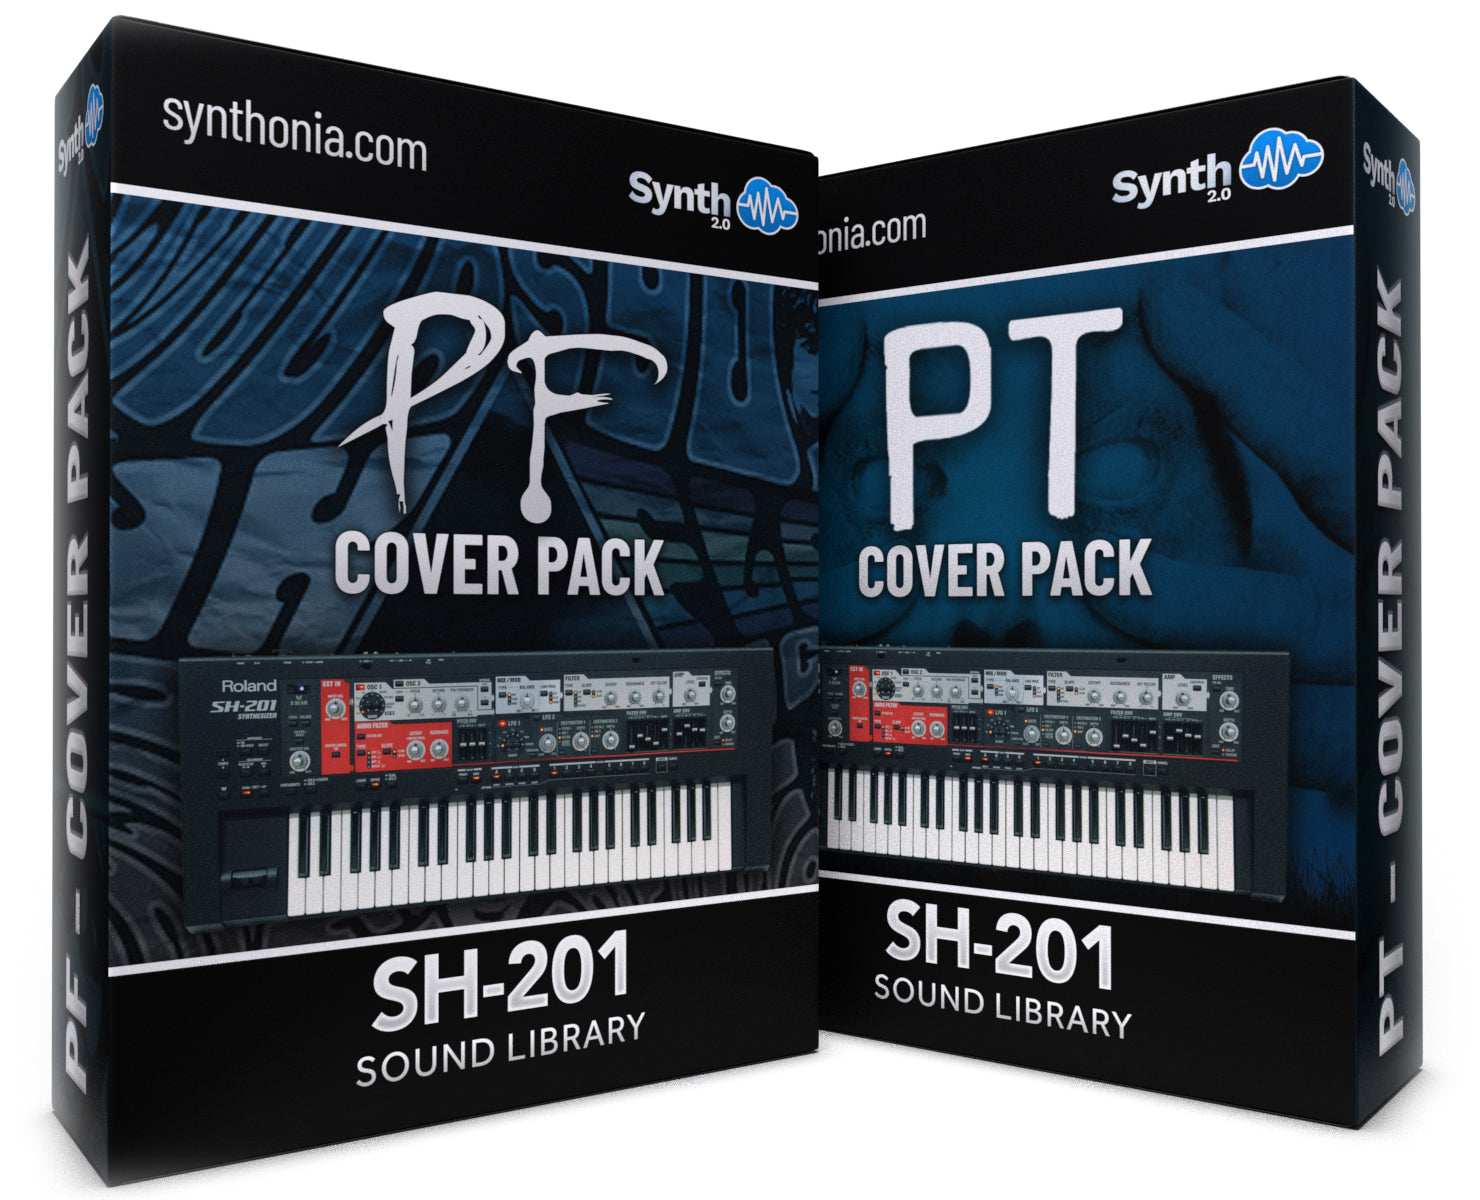 SCL153 - ( Bundle ) - PF Cover Pack + Porcupine Tree Cover Pack - SH-201